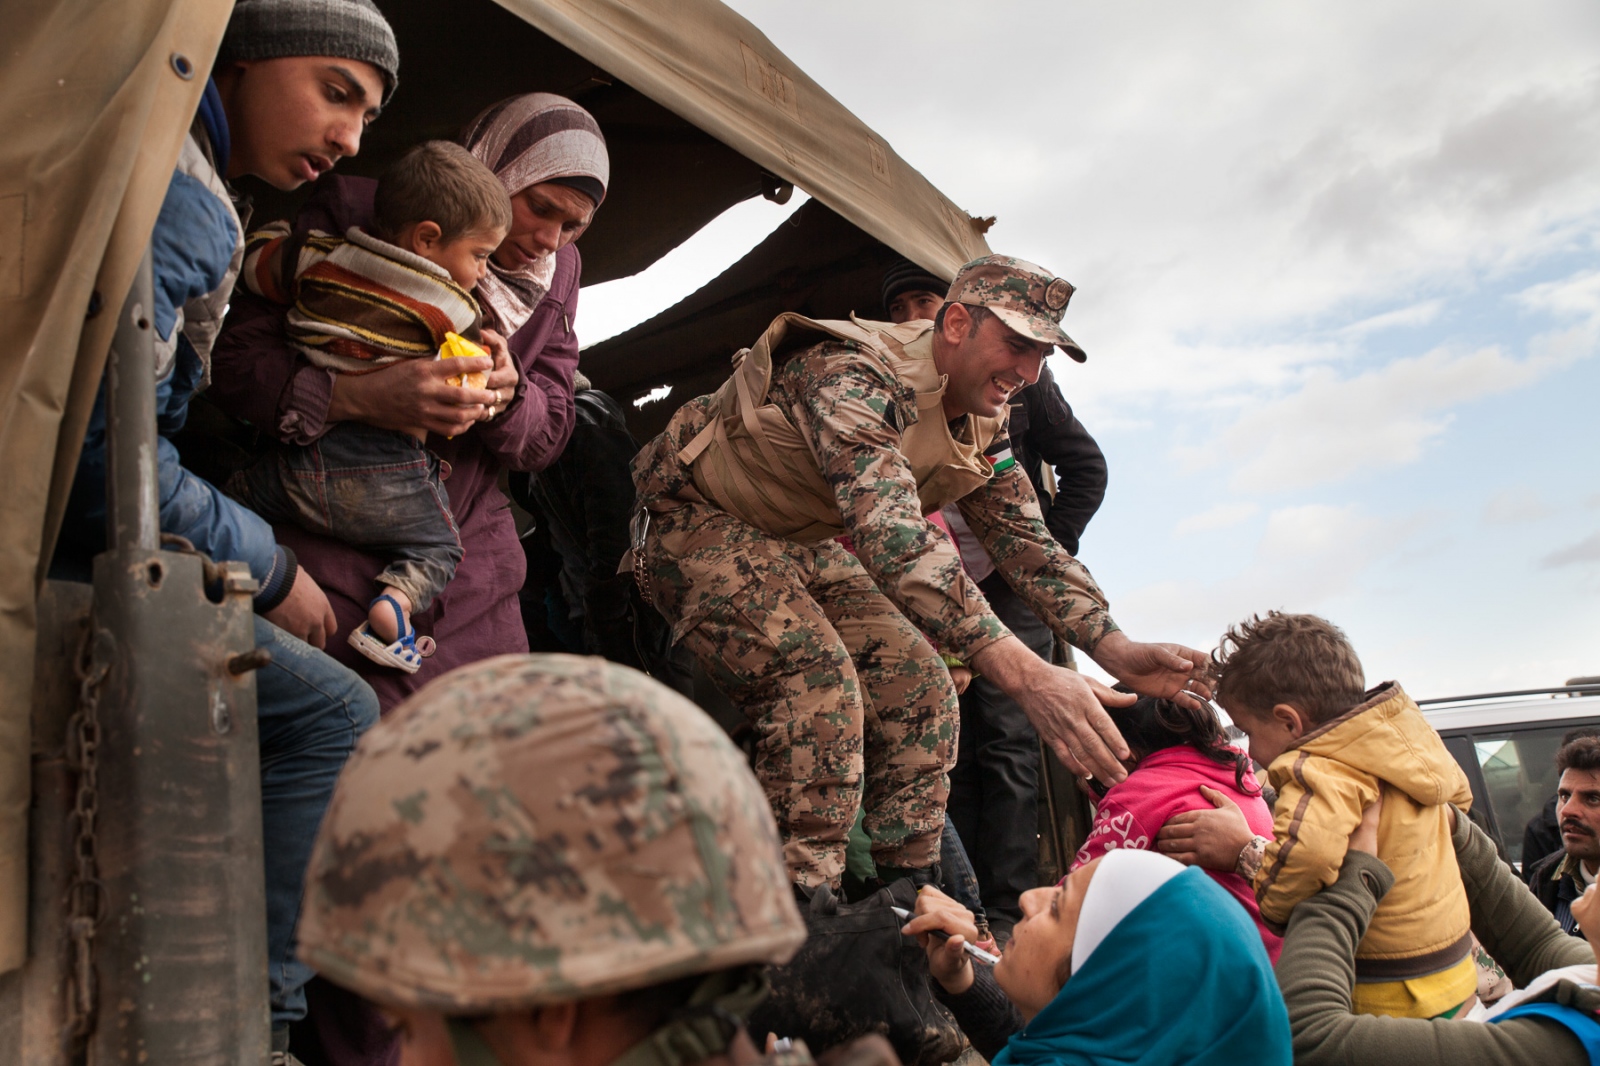 The Syrian Refugee Crisis - Jordanian troops and UNHCR members provide the refugees...